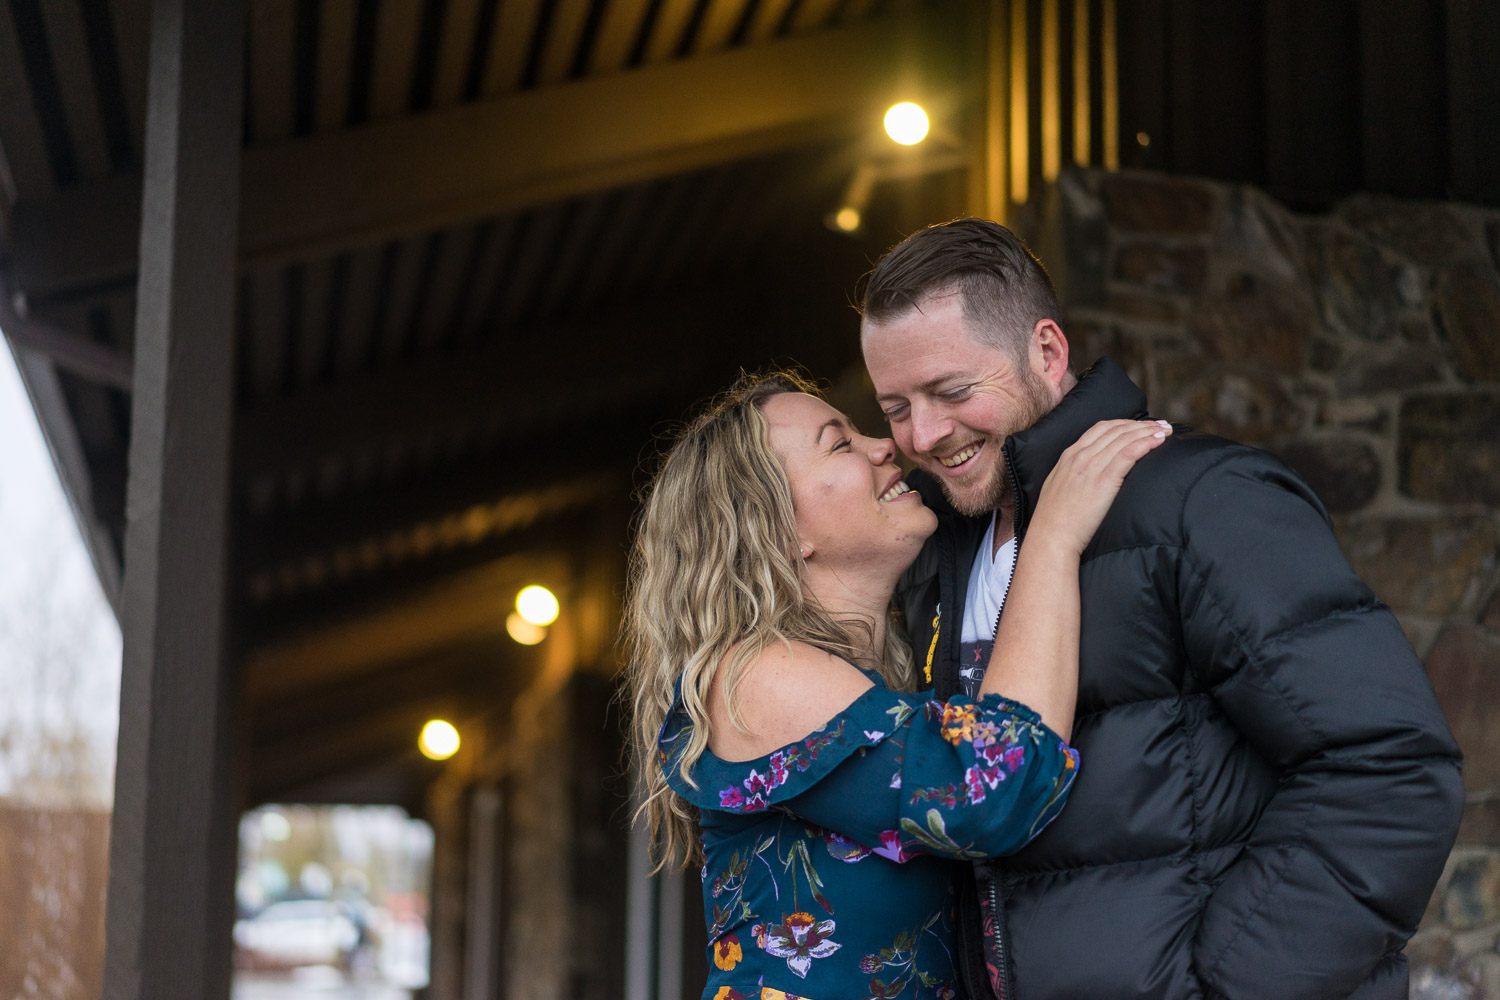 Winter Keystone Engagement Photos at a brewery